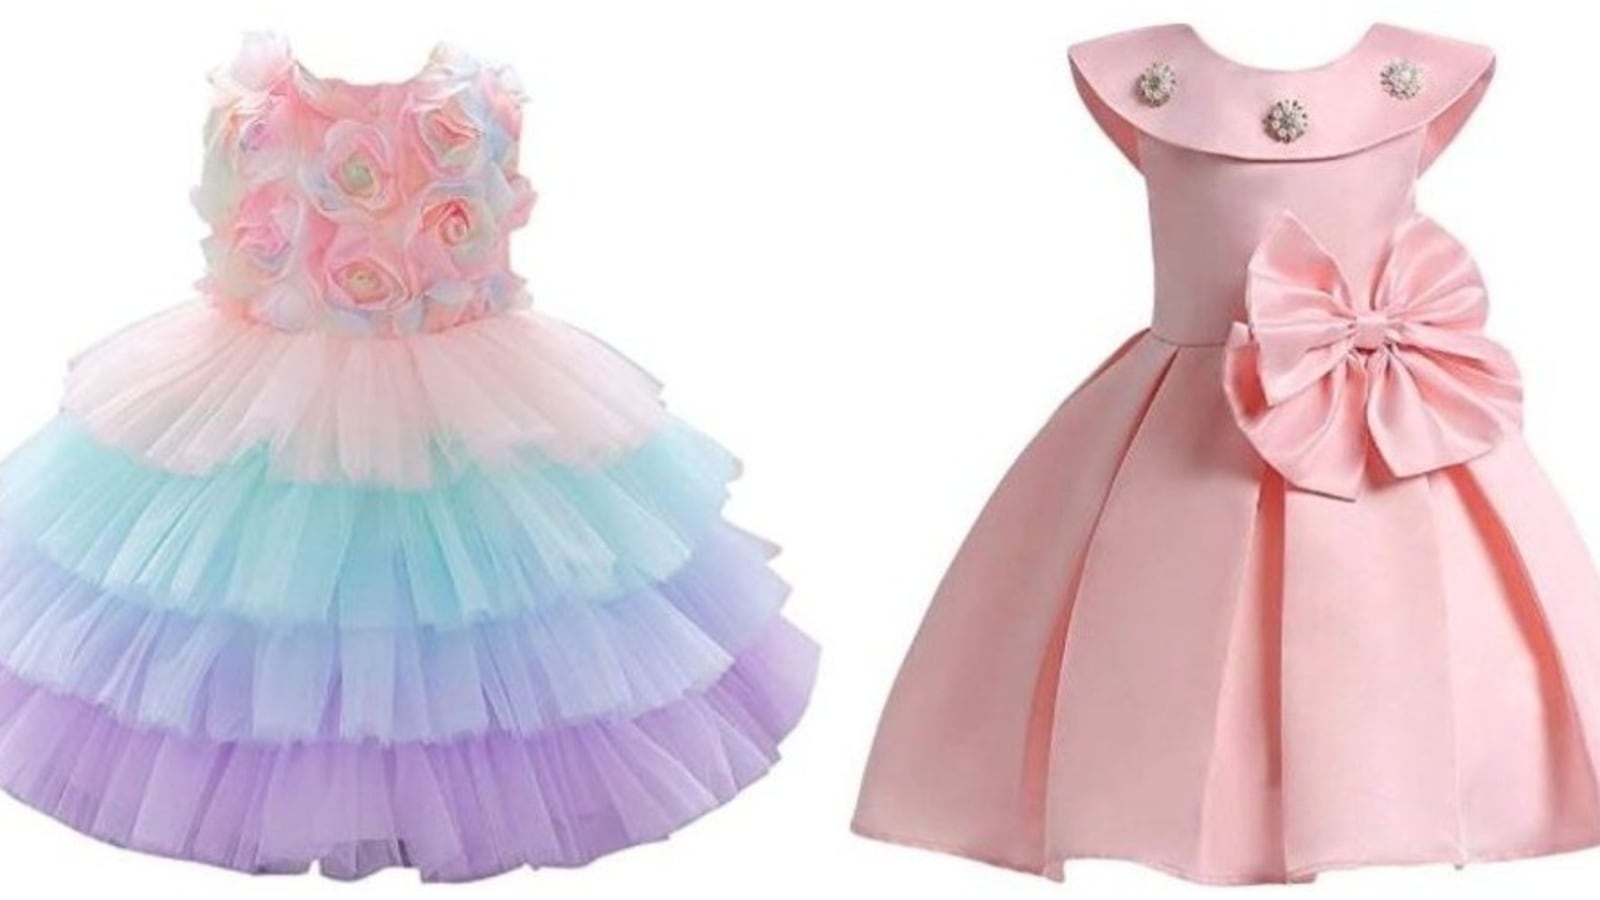 Don't let winter spoil the fun, dress up your baby girl in frill ...